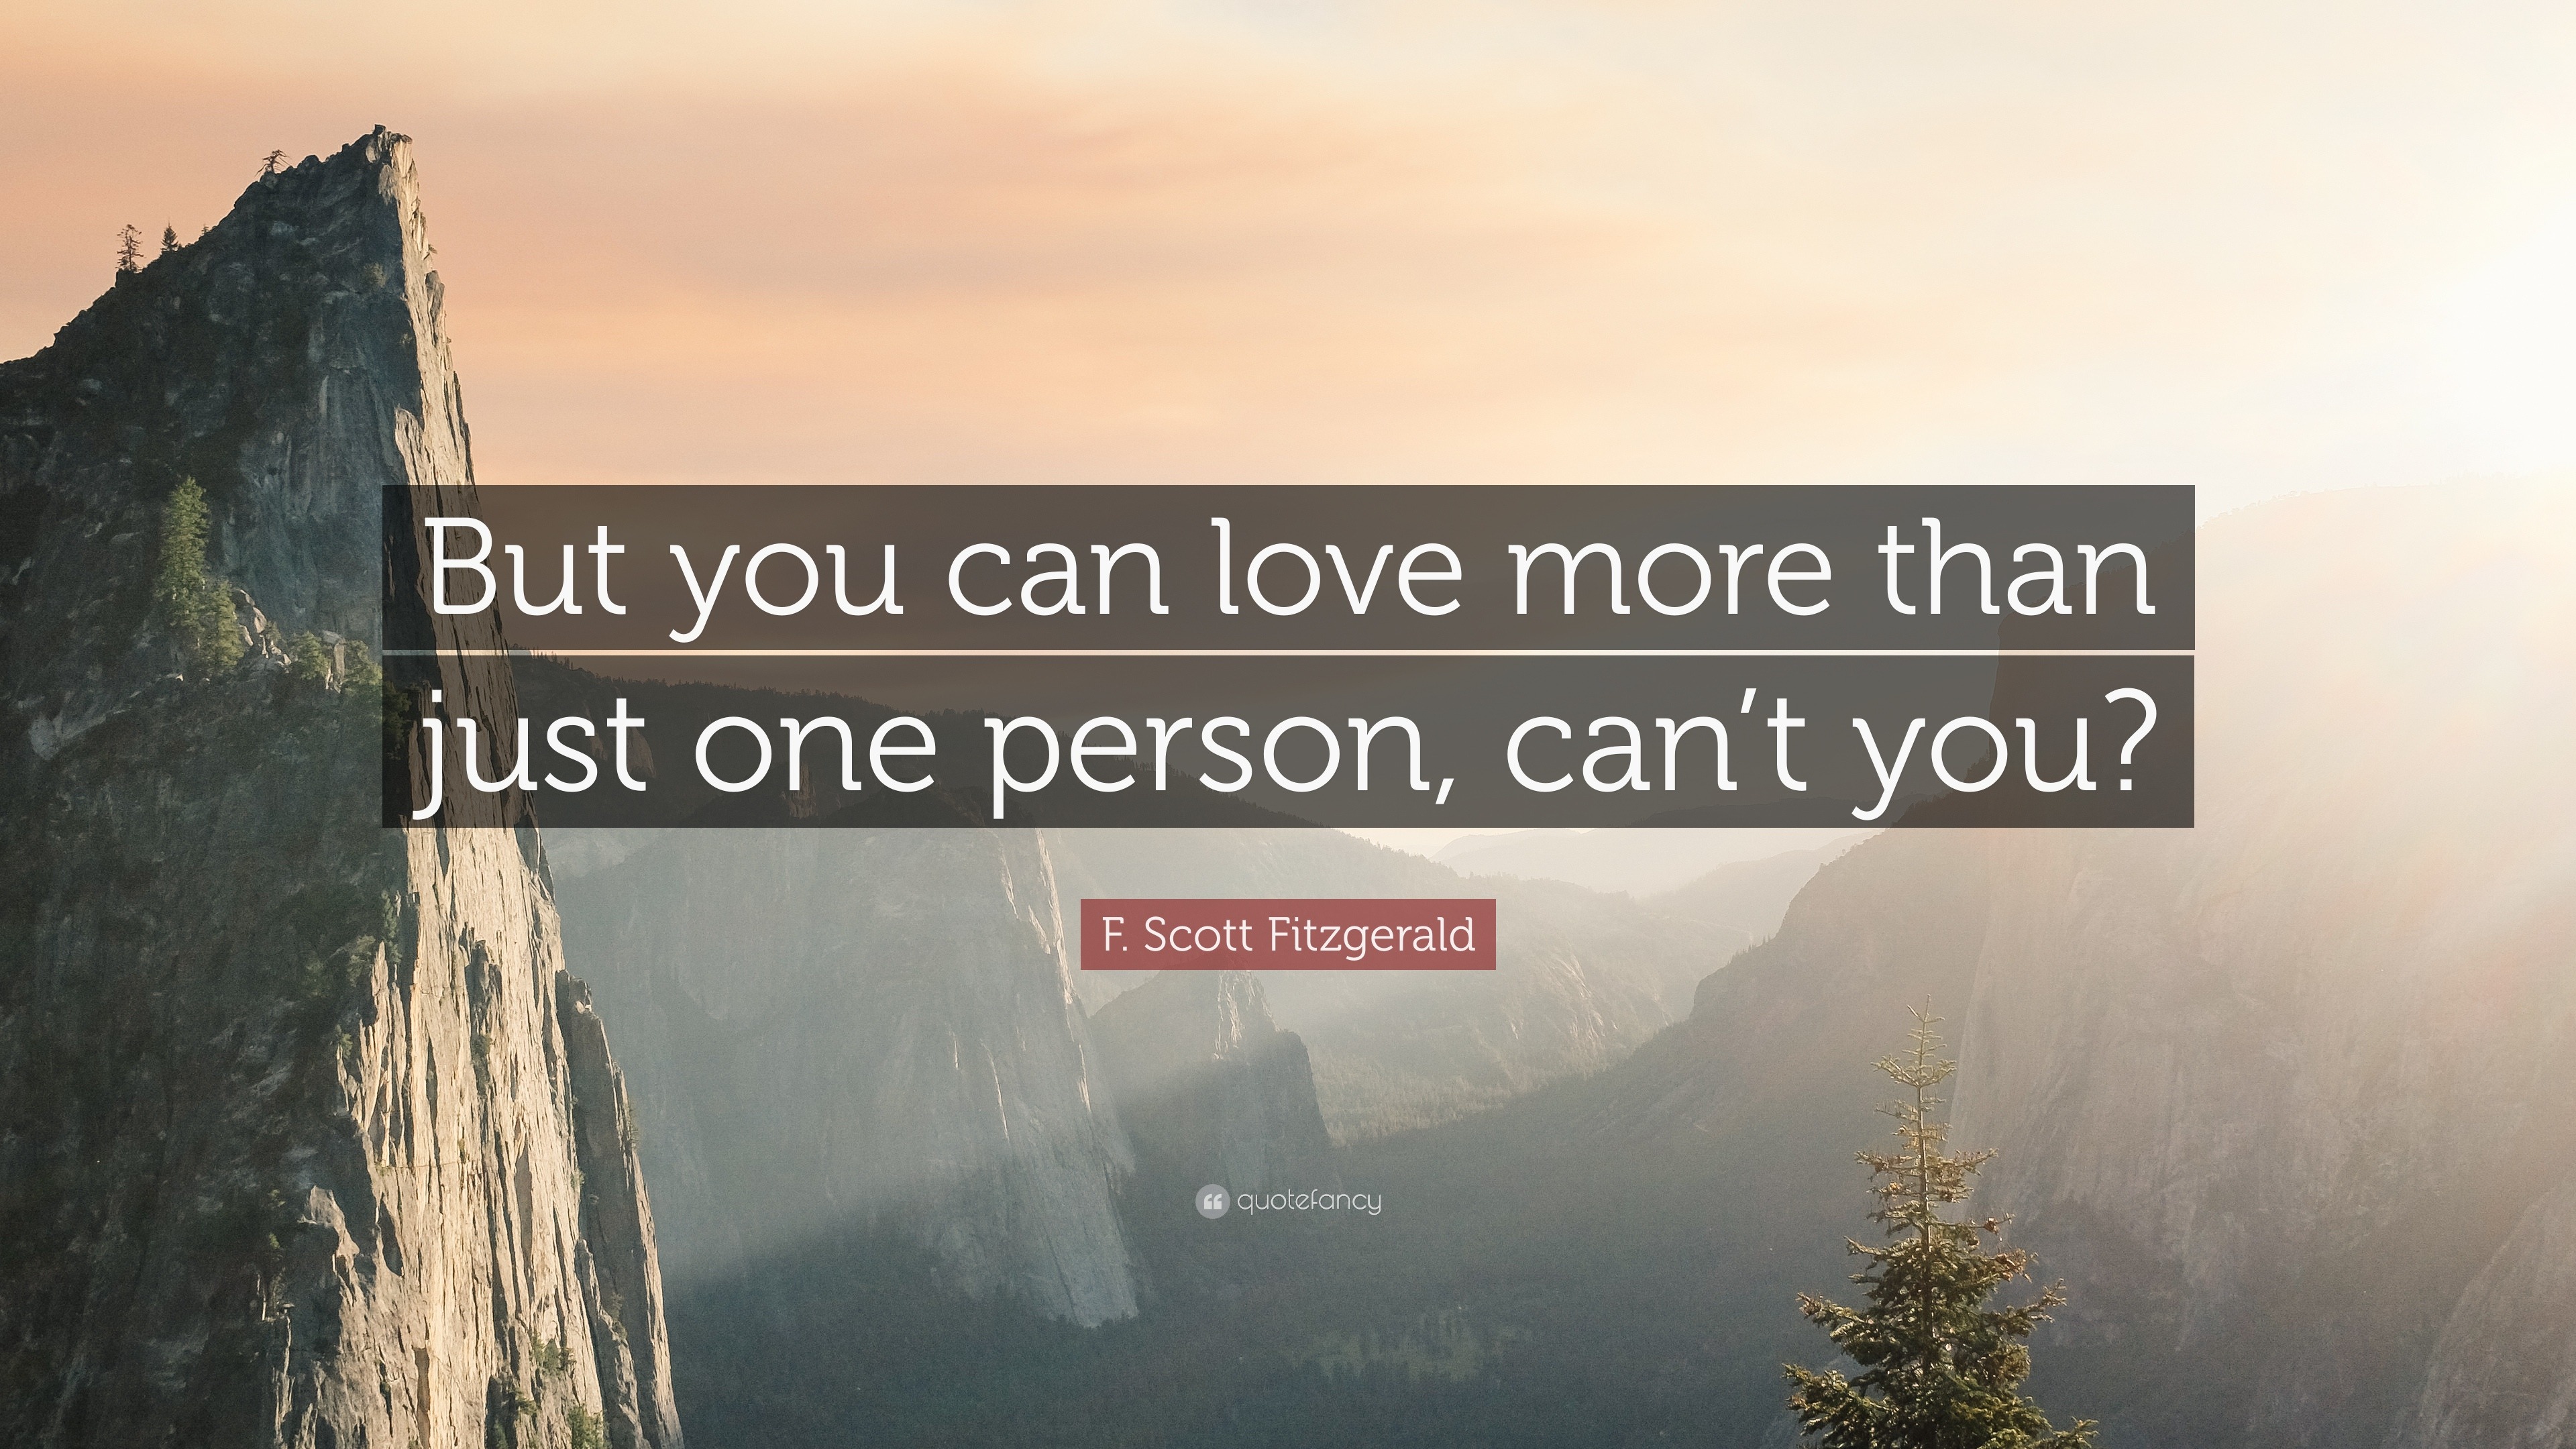 F. Scott Fitzgerald Quote: “But you can love more than just one person ...